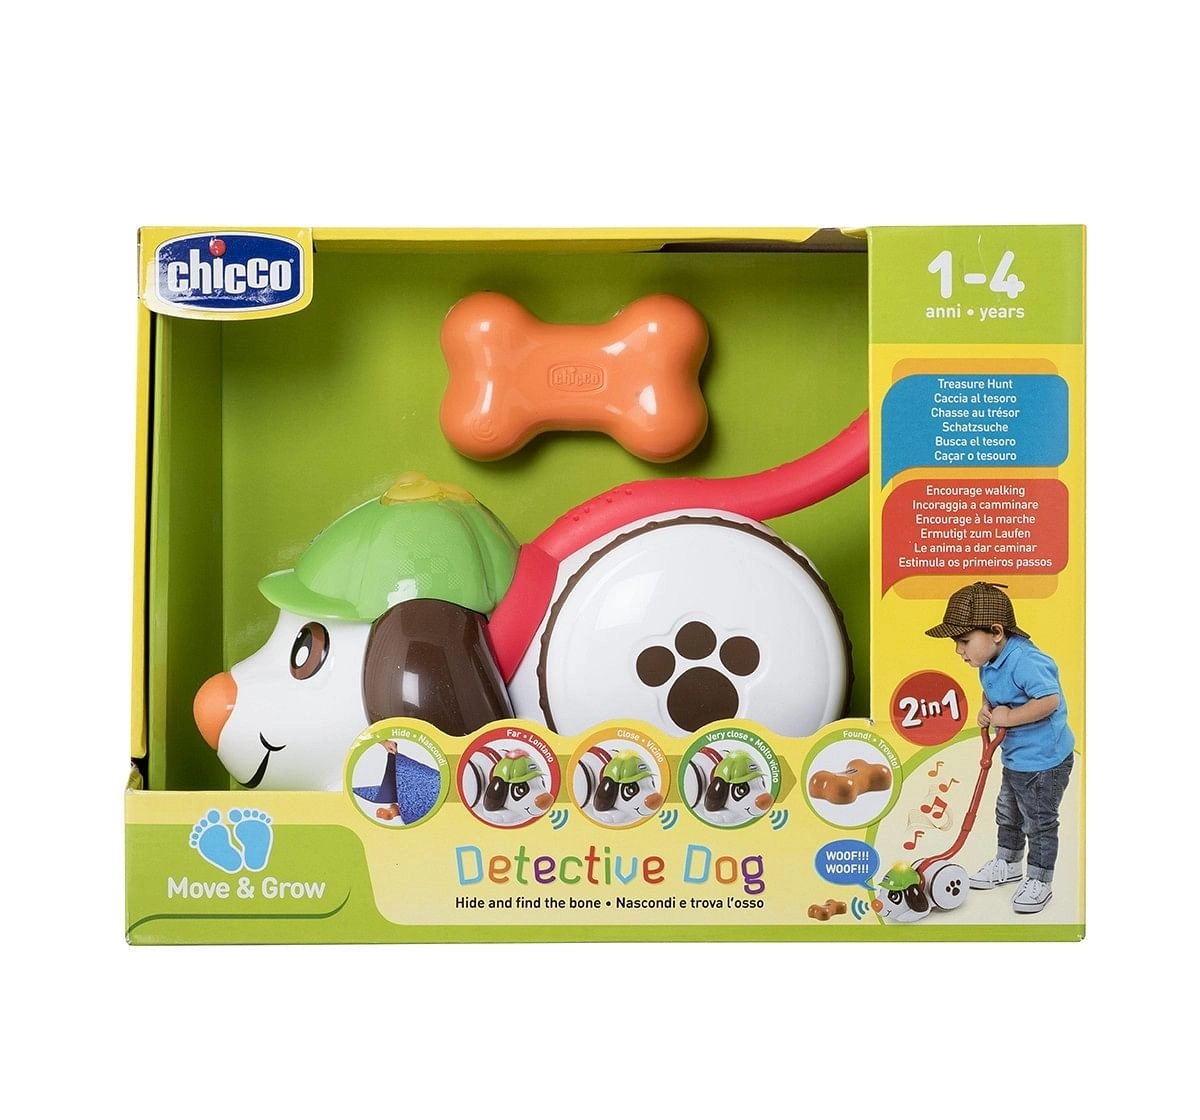 Chicco Detective Dog Activity Toy for Kids age 12M+ 